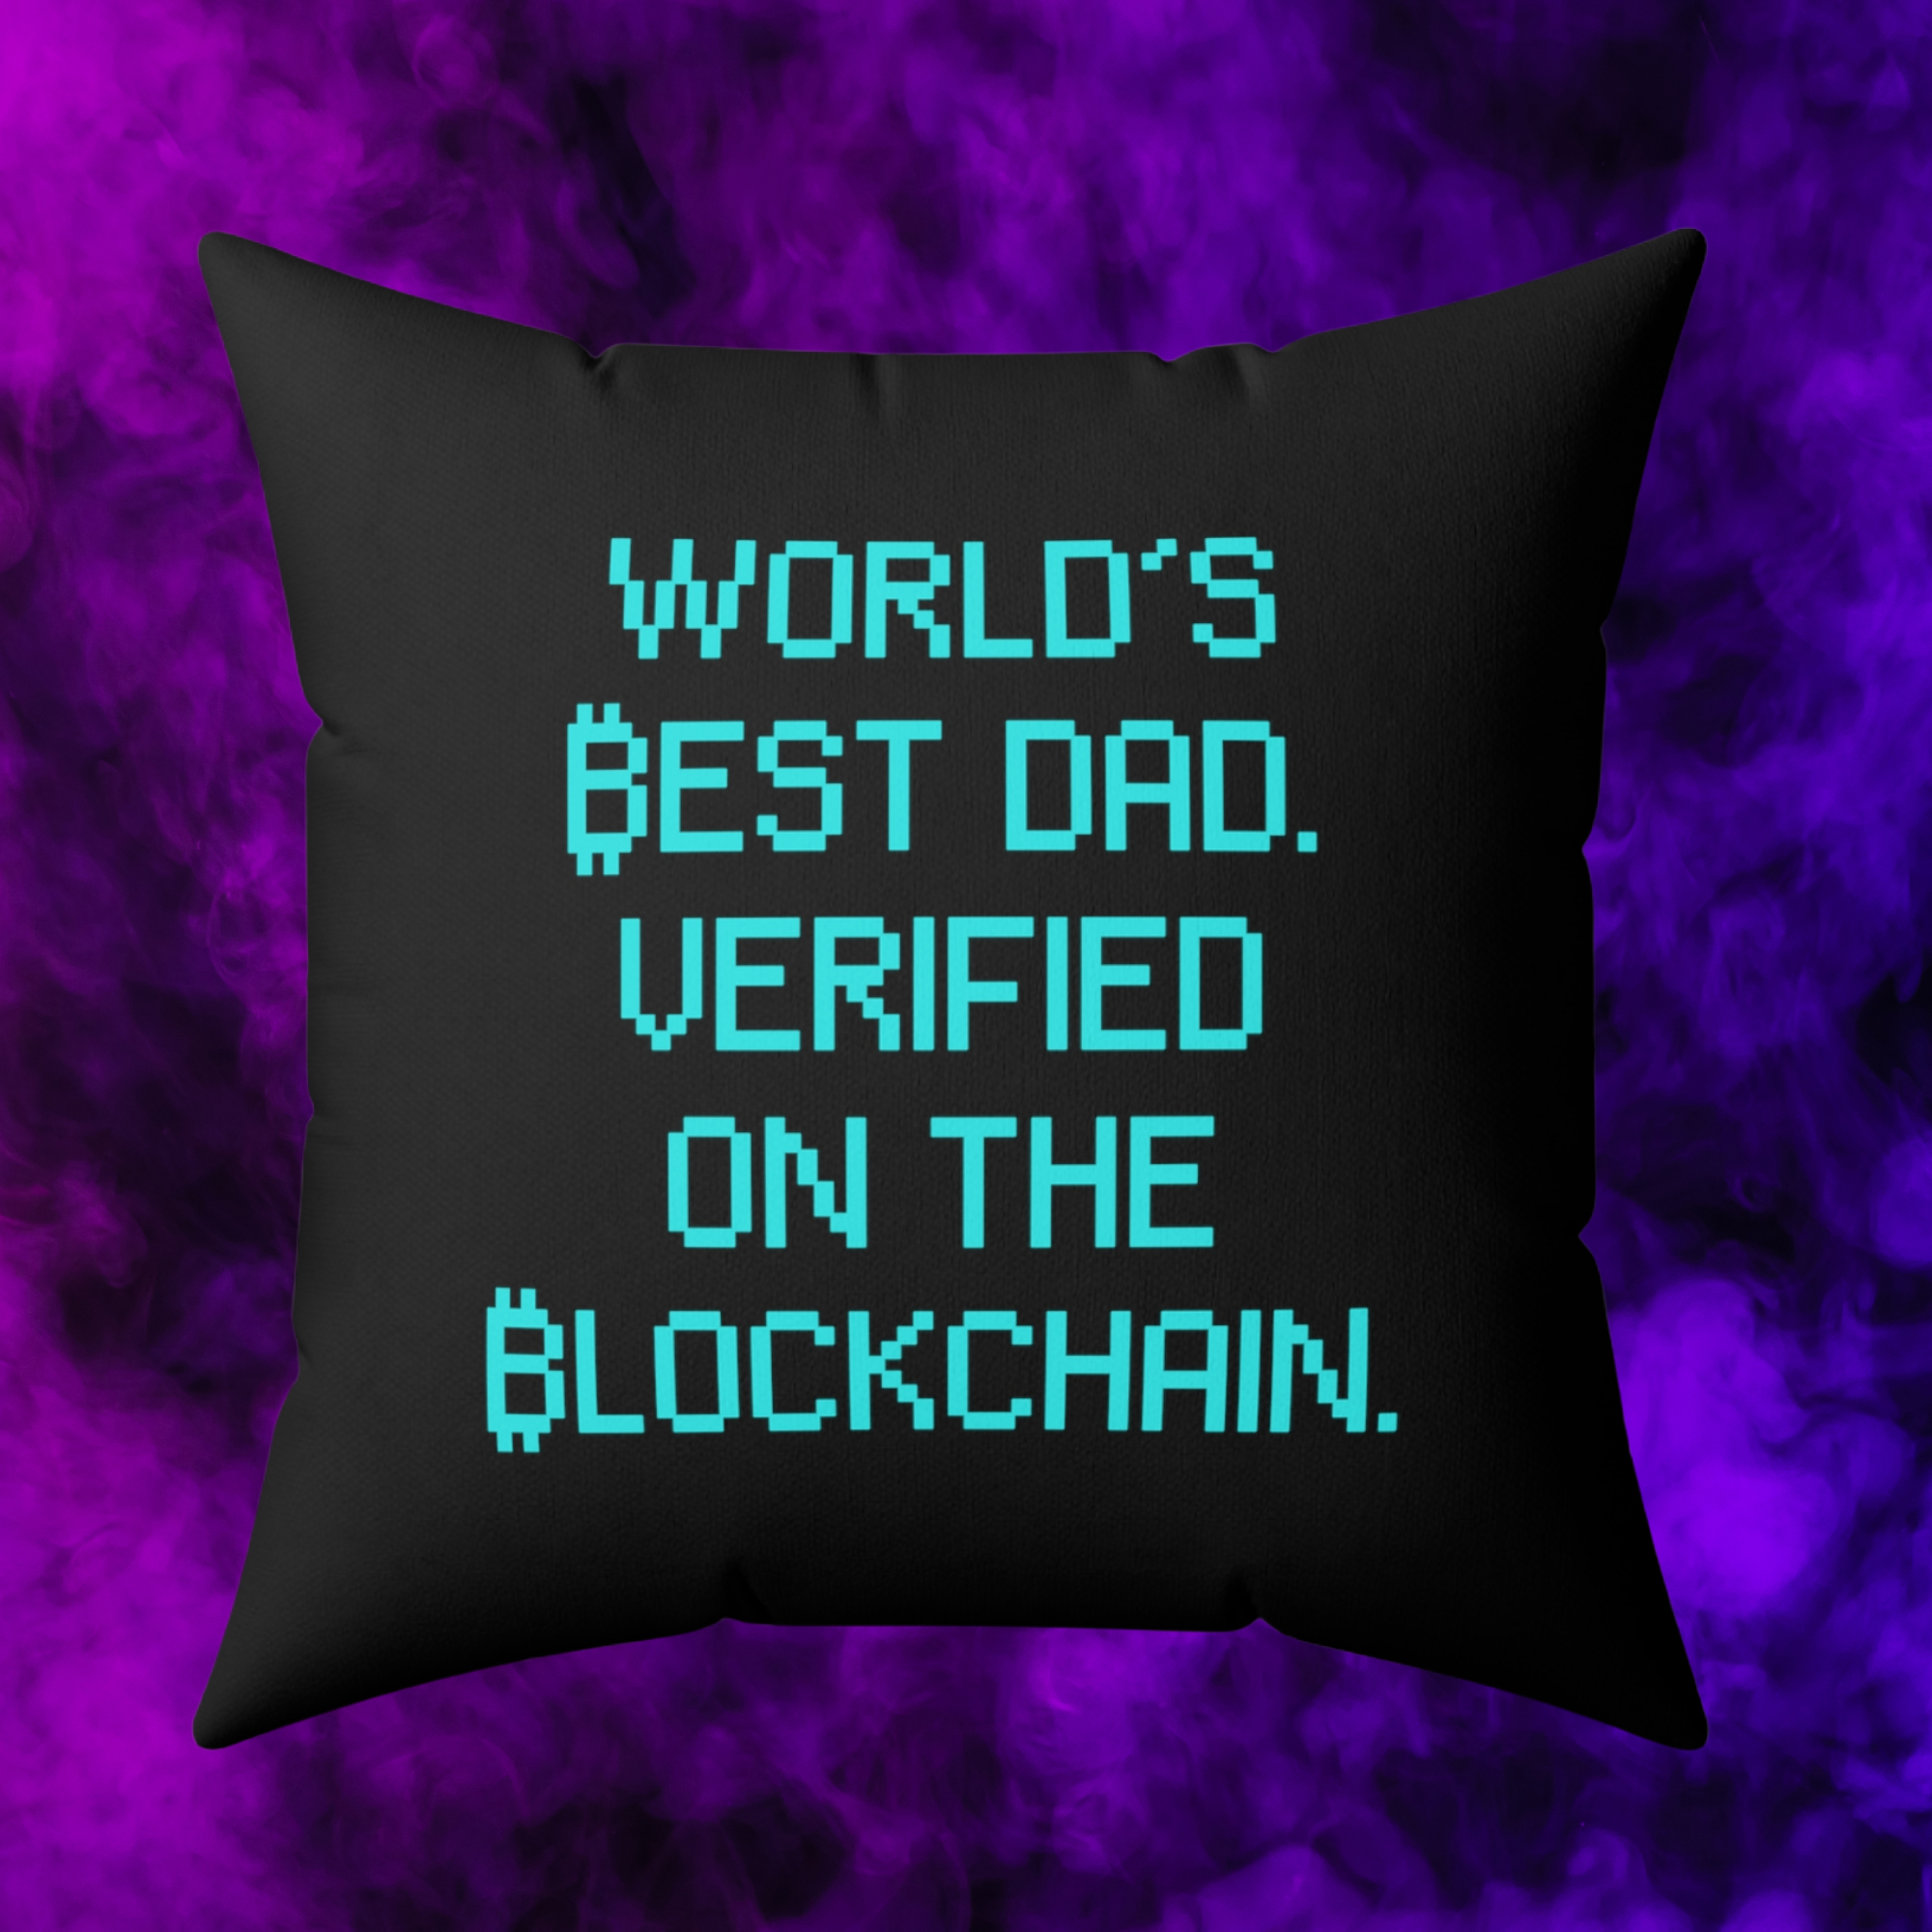 Bitcoin Merchandise: World's Best Dad - Verified on the Blockchain Pillow. Available at NEONCRYPTO STORE.